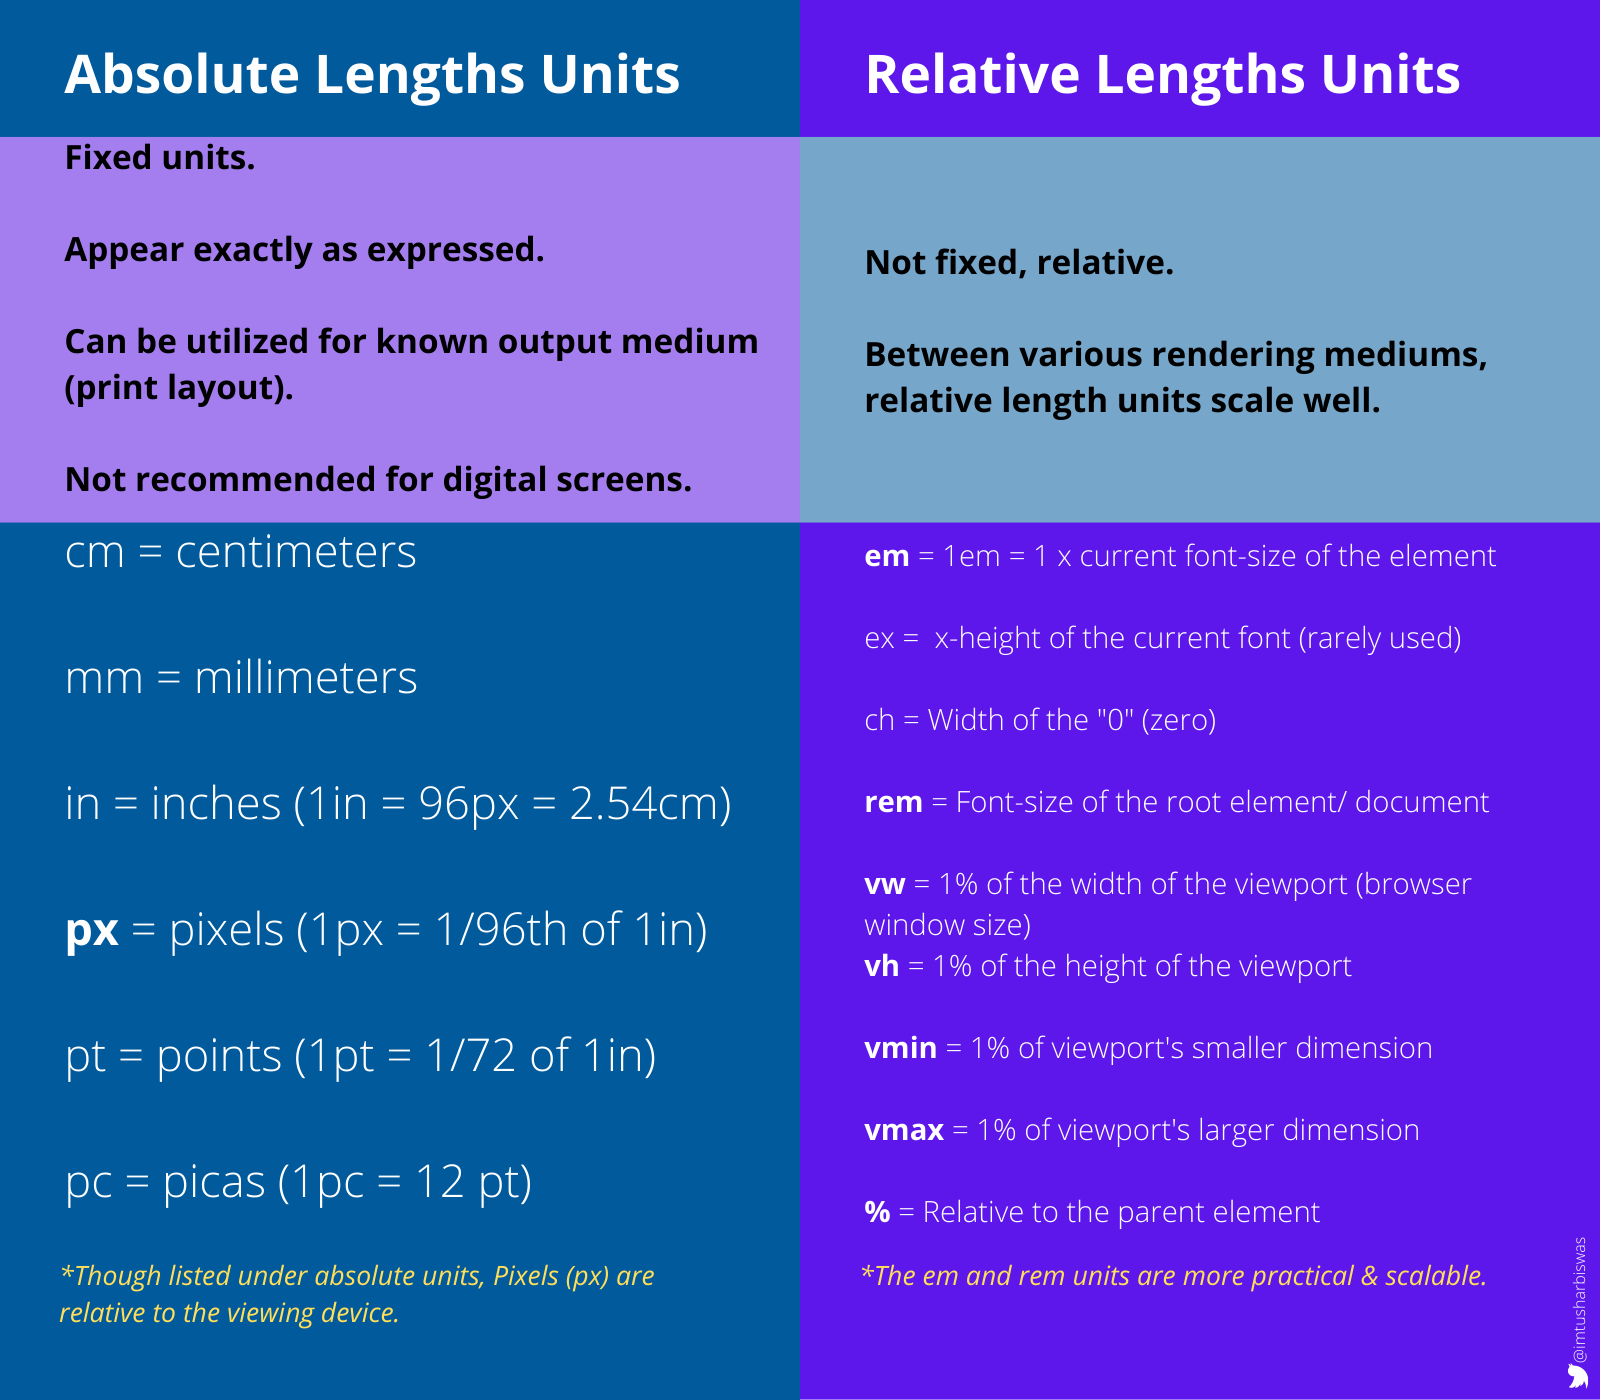 Absolute Vs Relative.png